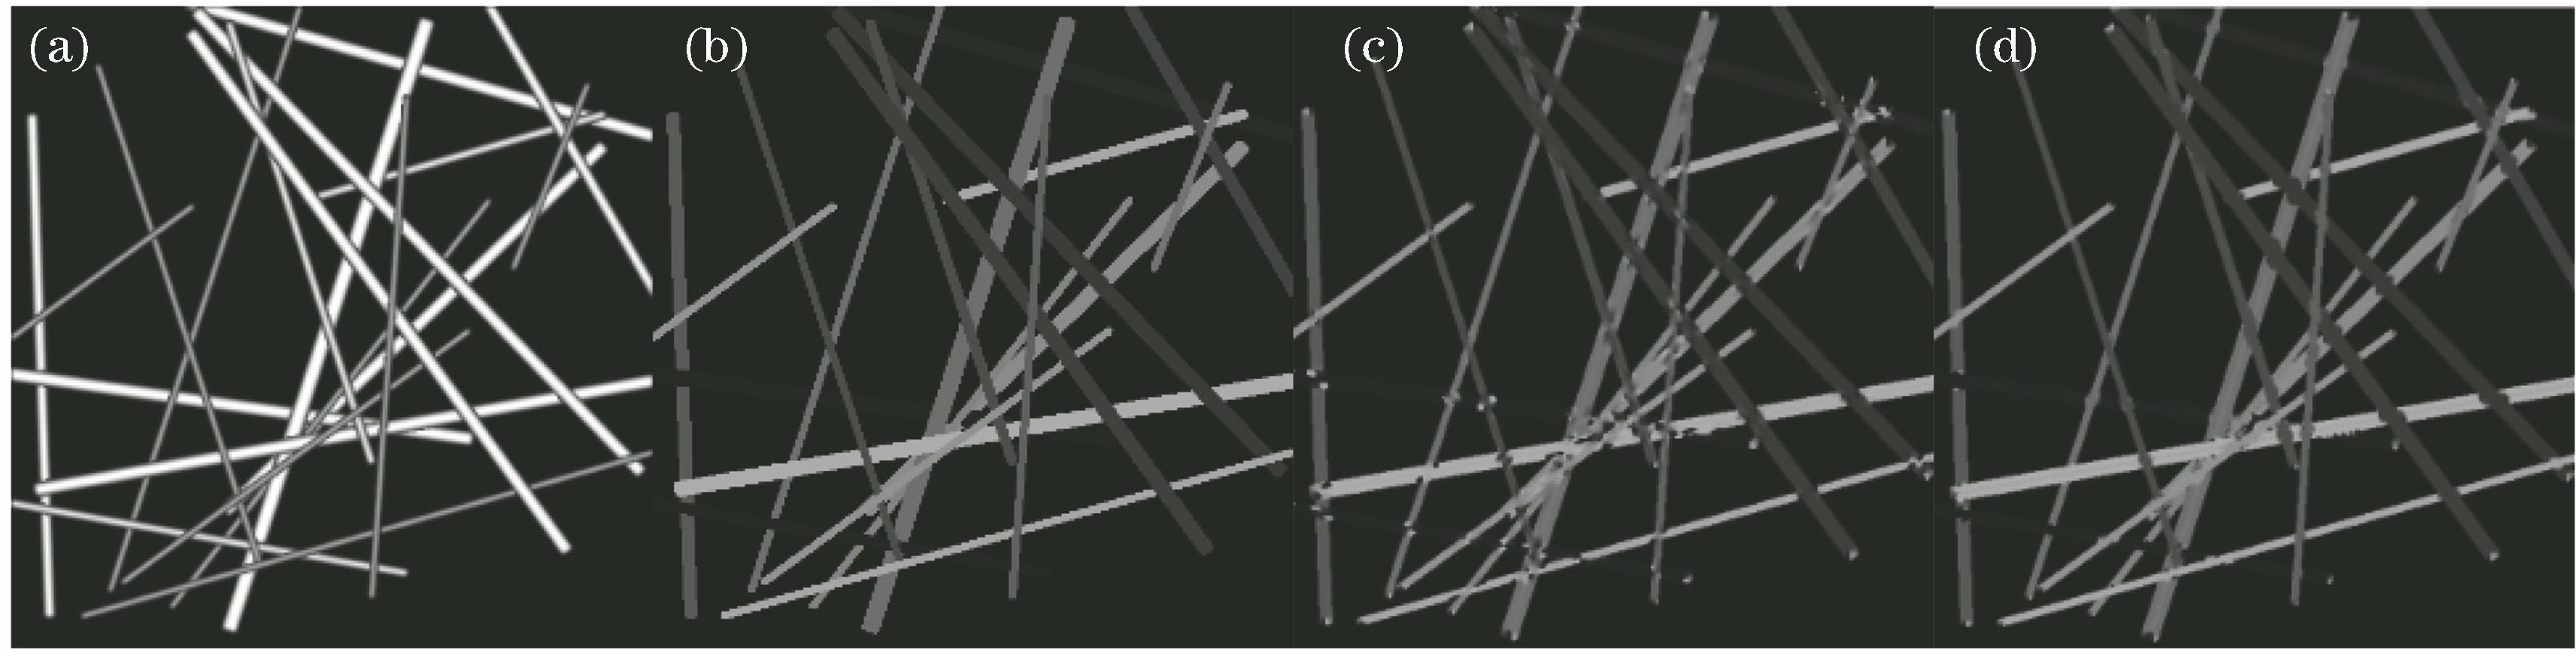 Simulation results. (a) Simulation of two-dimensional fiber; (b) grayscale in th actual direction; (c) vector weighted algorithm; (d) proposed algorithm